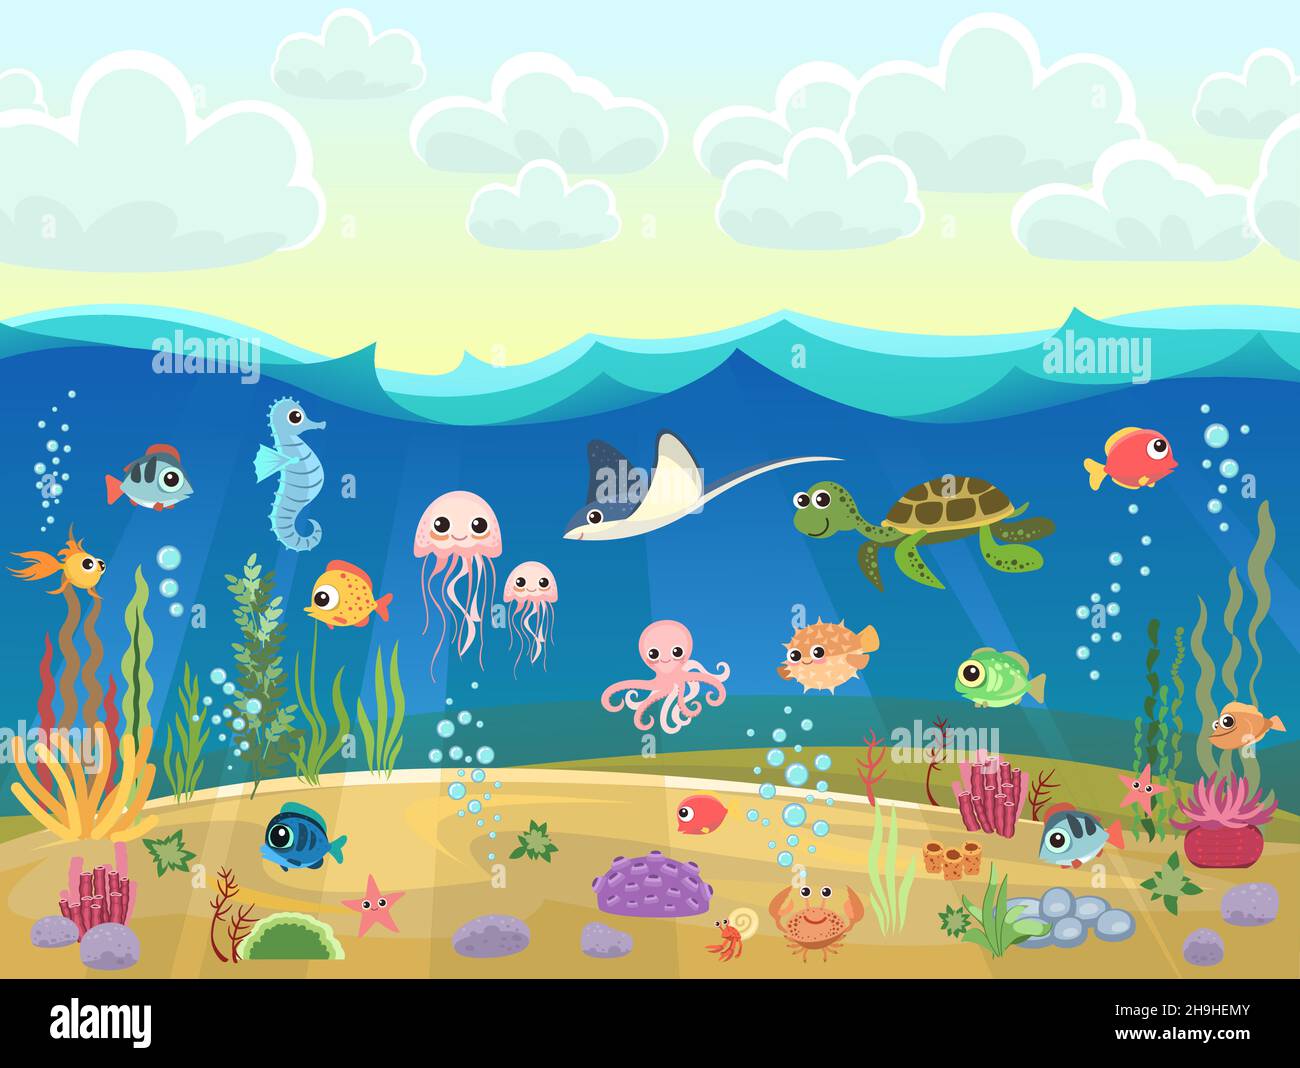 Bottom of reservoir with fish. Blue water. Sea ocean. Sky with clouds. Underwater landscape with animals. plants, algae and corals. Cartoon style Stock Vector